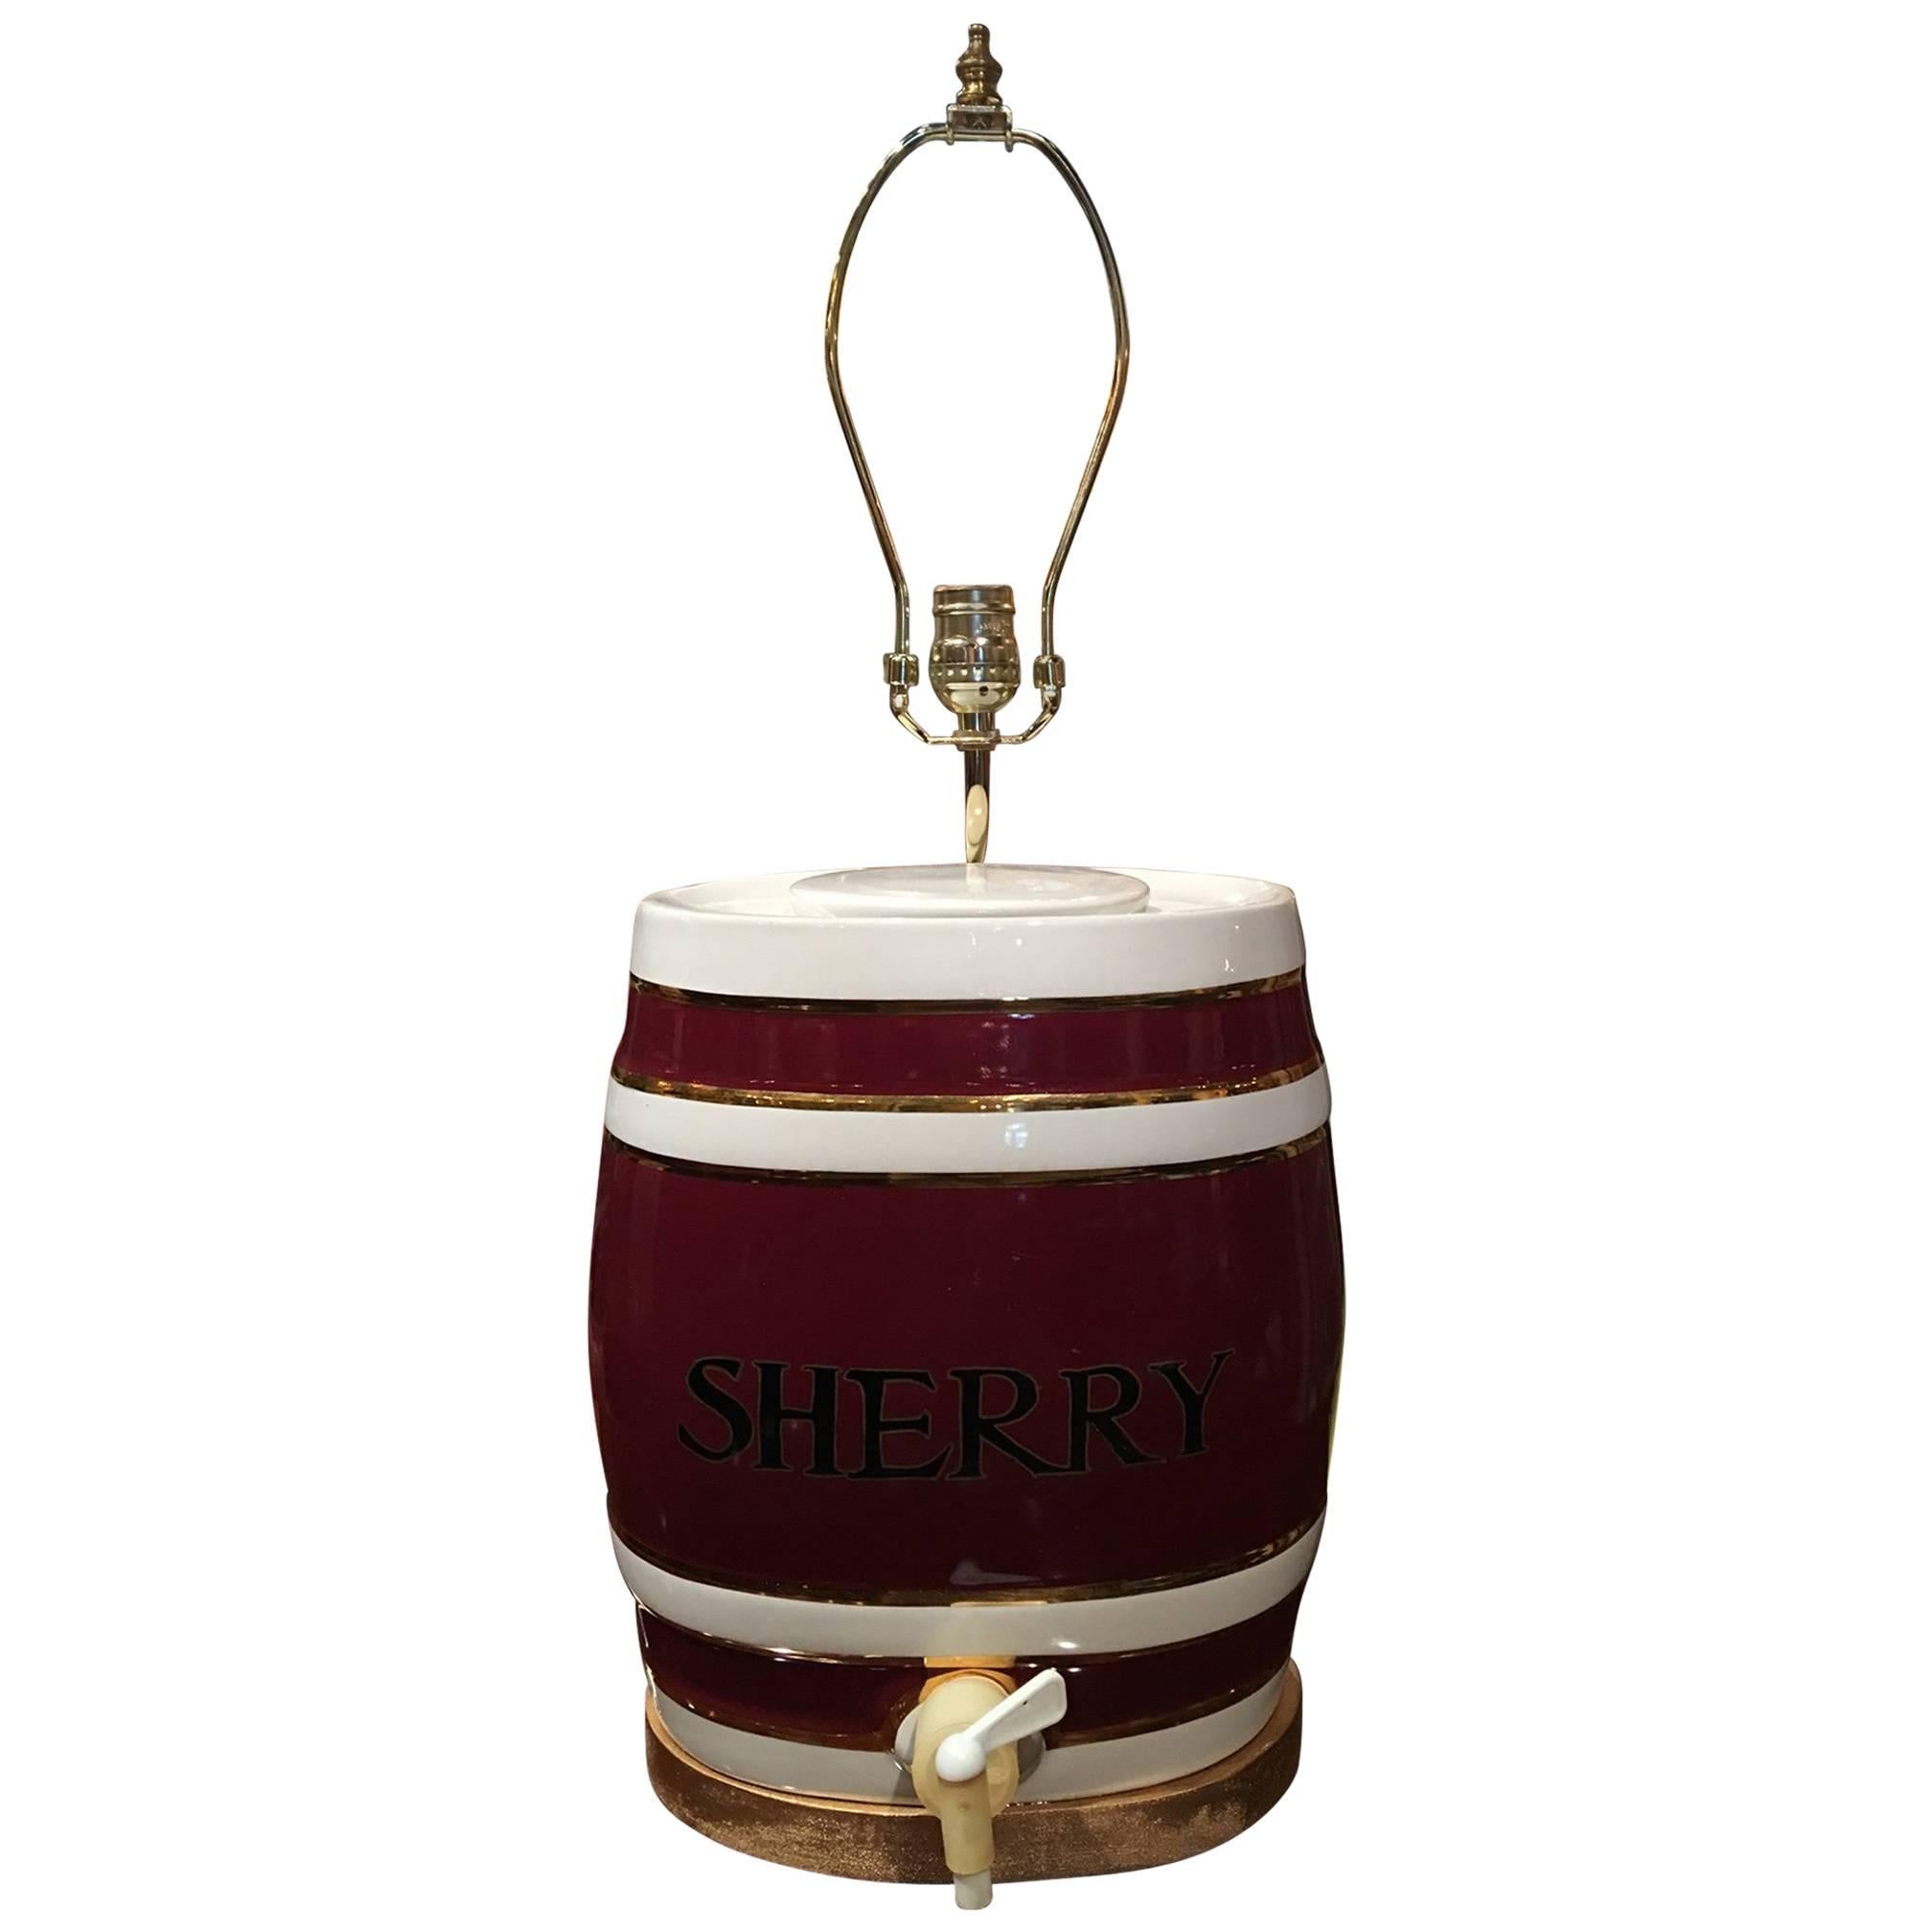 English Royal Victoria Spirit Barrel Adapted as a Lamp, Early 20th Century